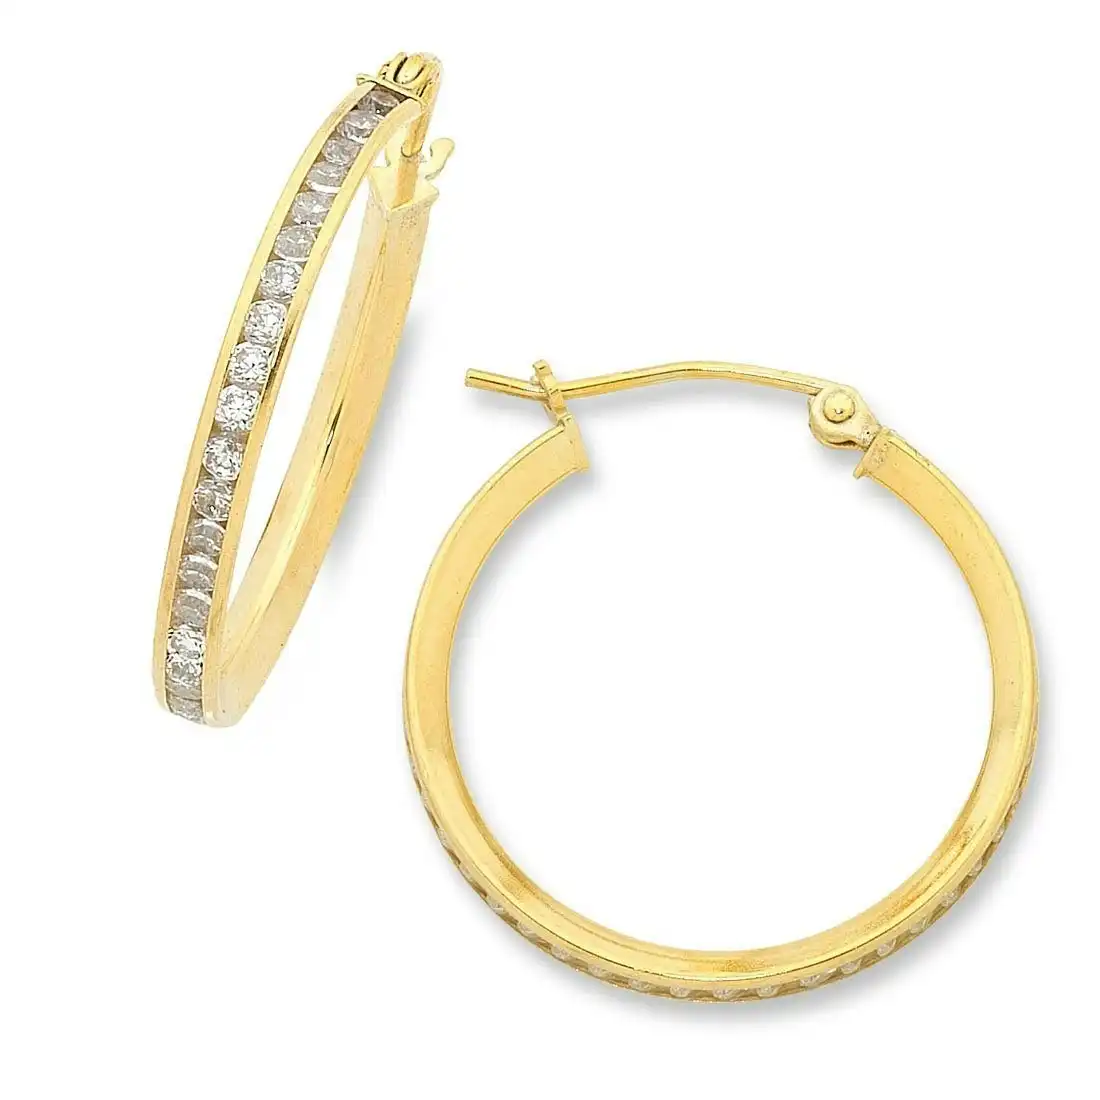 9ct Yellow Gold Silver Infused Cubic Zirconia Hoop Earrings 23mm